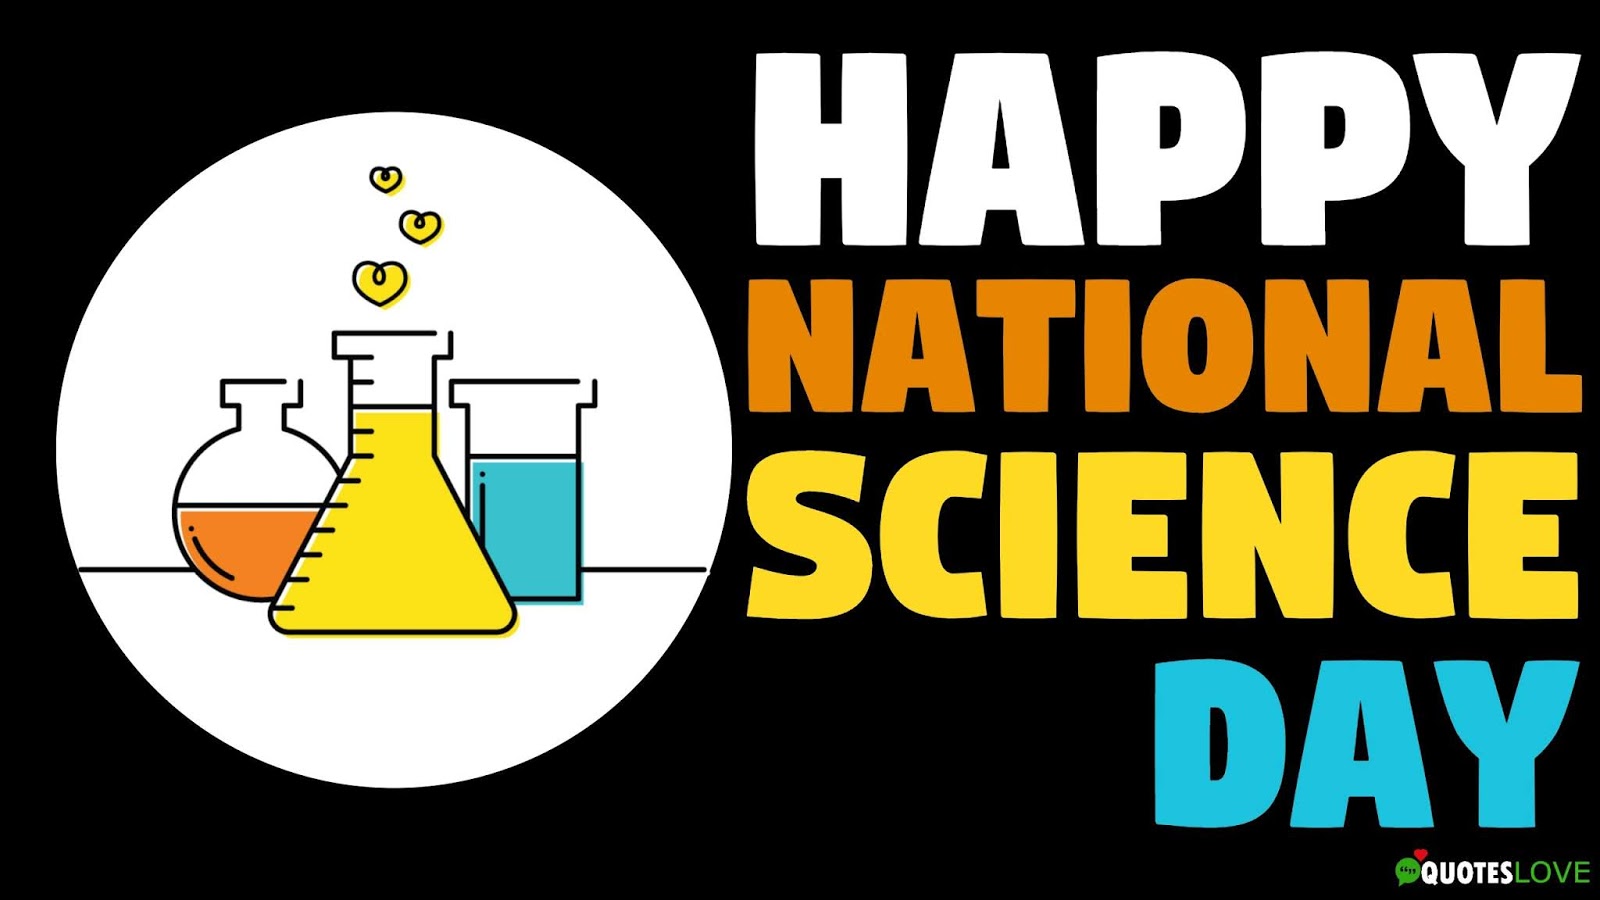 73+ (Best) National Science Day Quotes, Wishes, Messages, Speech, Images, Drawing, Poster, Logo